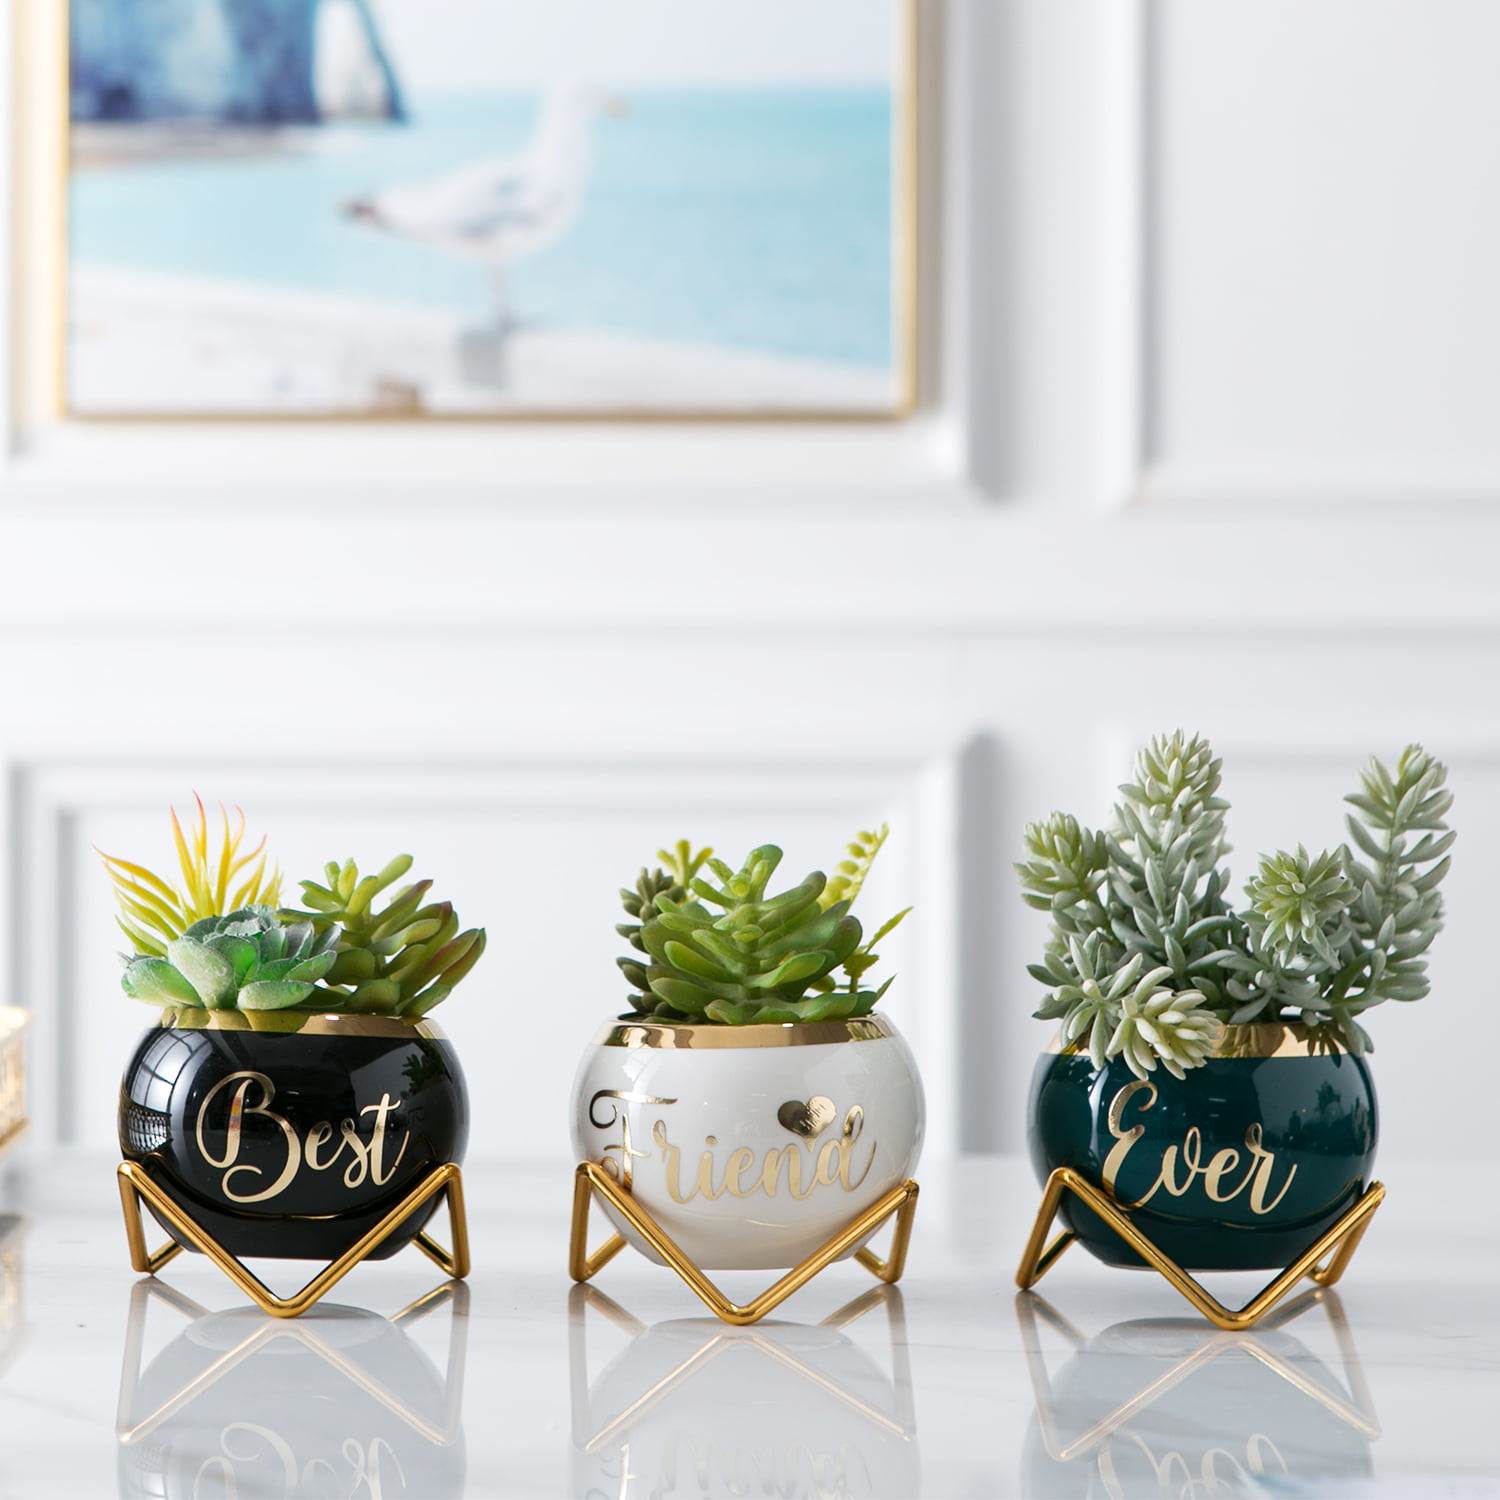  Birthday Gifts for Women,Bestfriend Gifts for Women,Unique Gift  Ideas for Birthday,Inspirational Gifts for Women,Graduation Gifts, Plastic  Succulent Pots Gifts with Gift Boxed(You are Loved) : Patio, Lawn & Garden